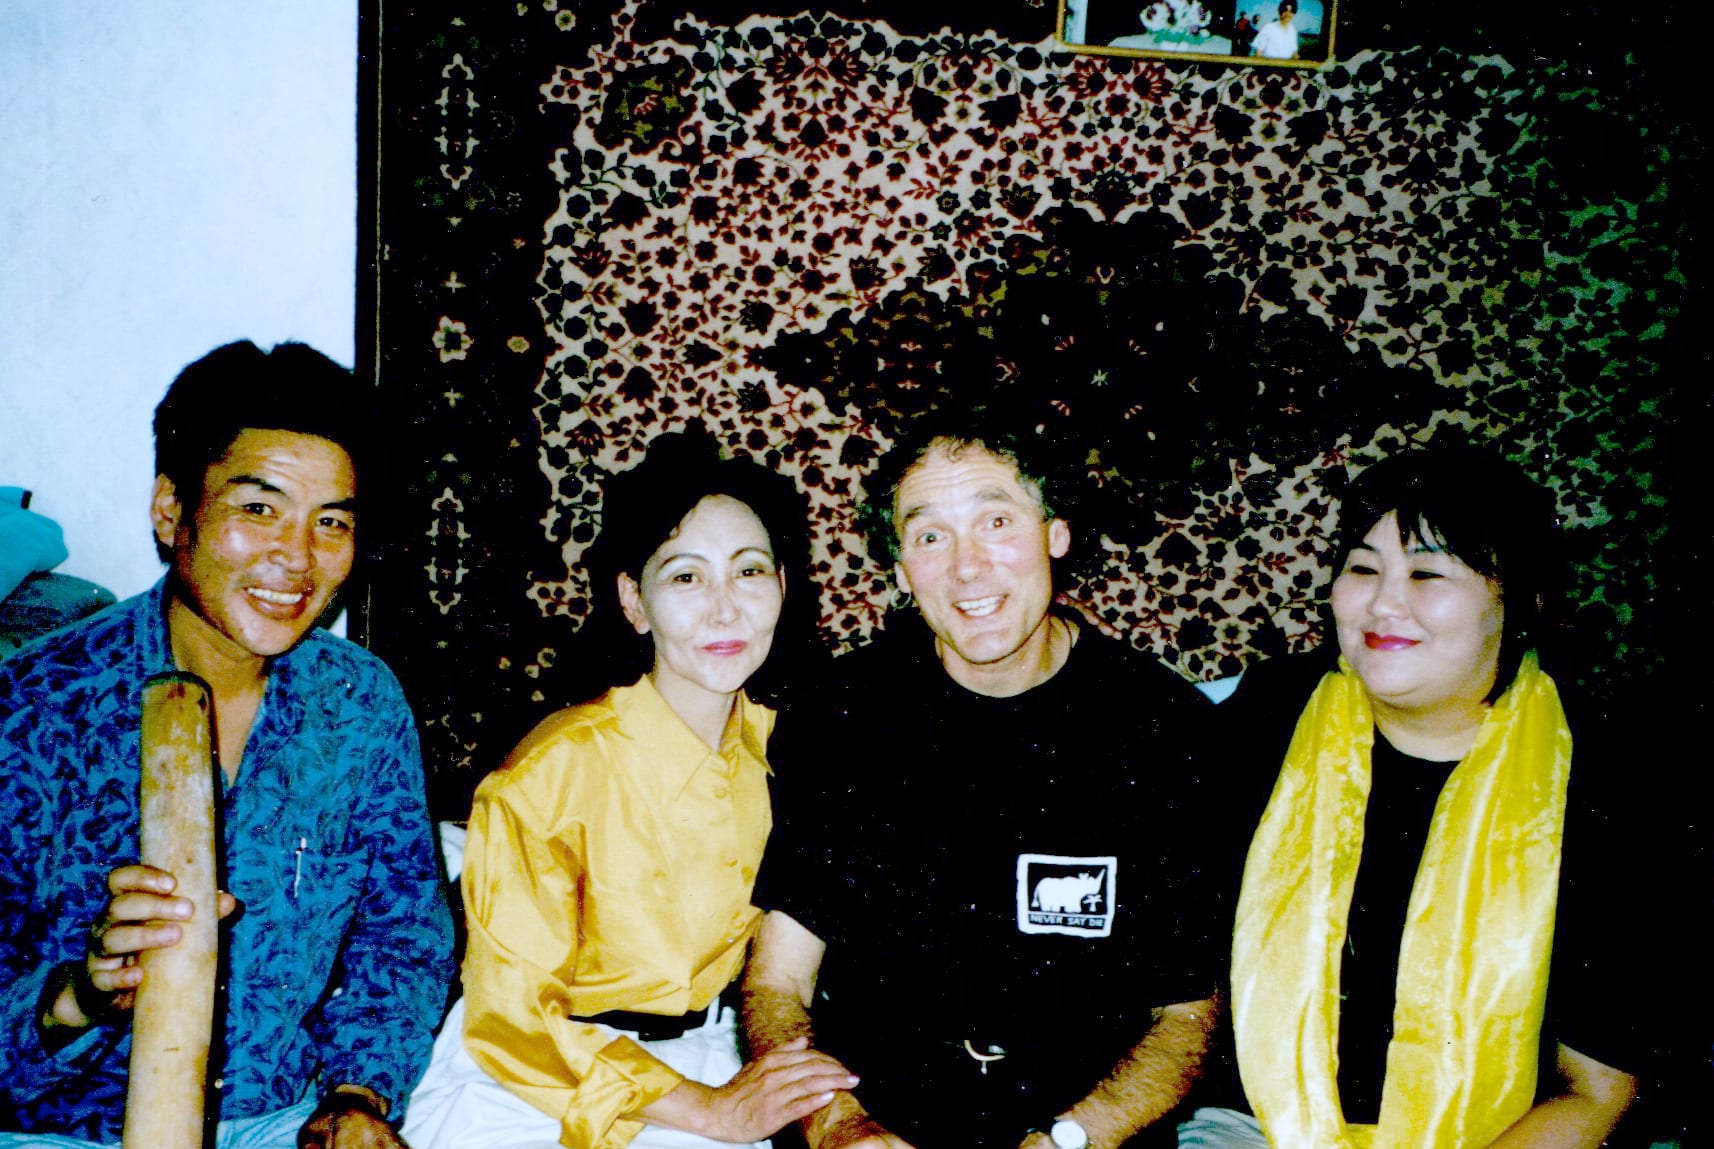 Jeff with Gereltsogt Oyuna and Alma at evening with Gereltsogt and friends